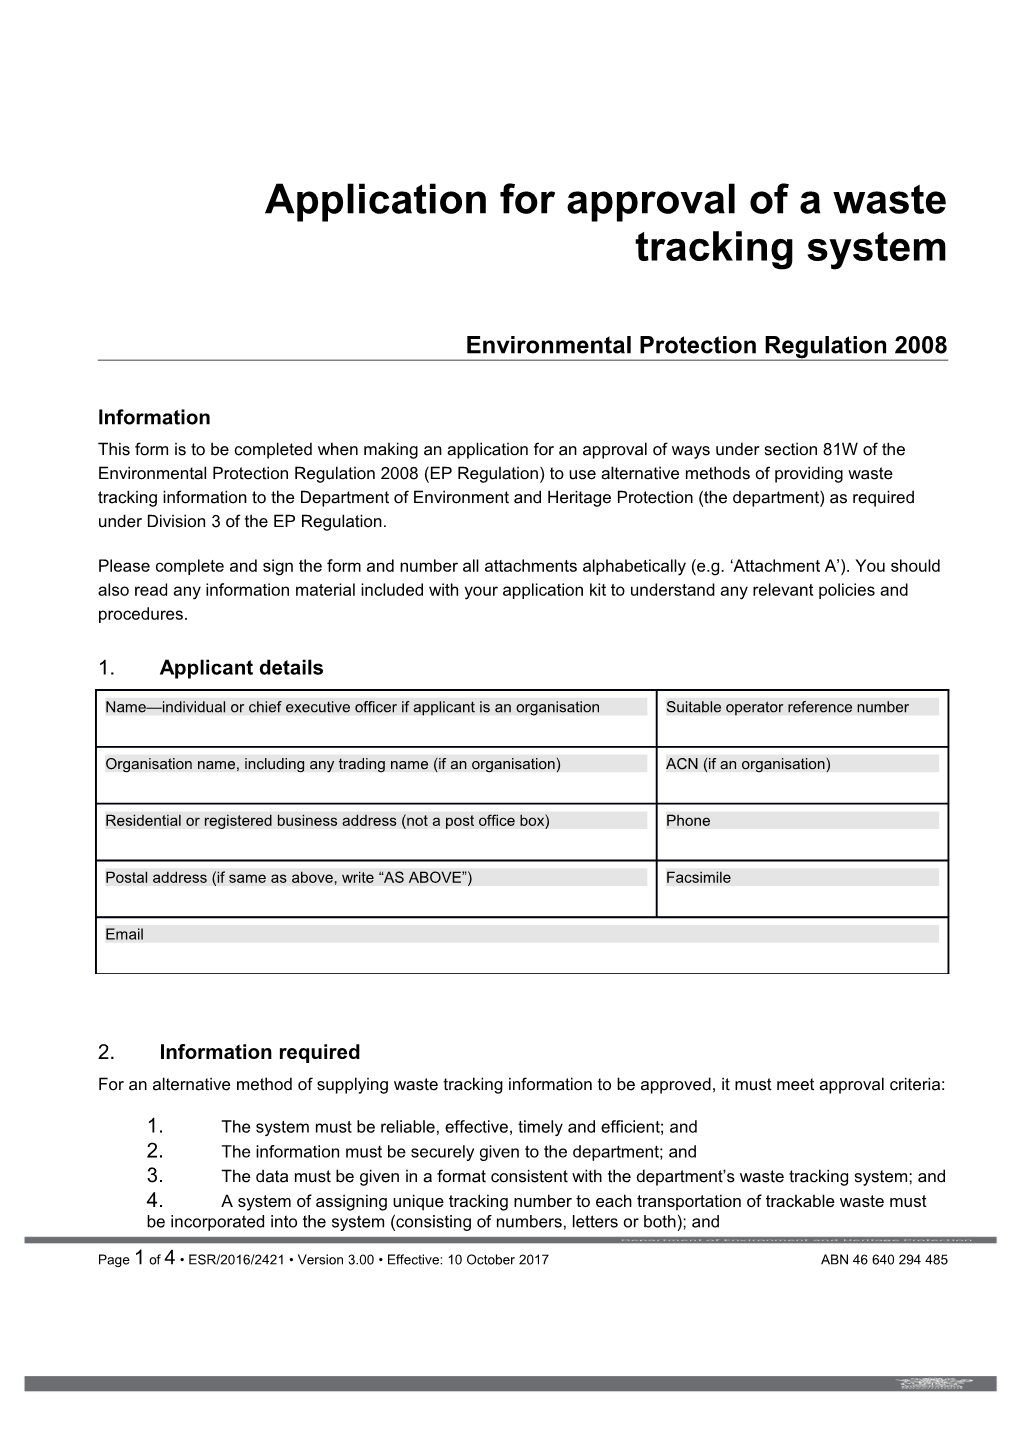 ESR/2016/2421 Application for Approval of a Waste Tracking System